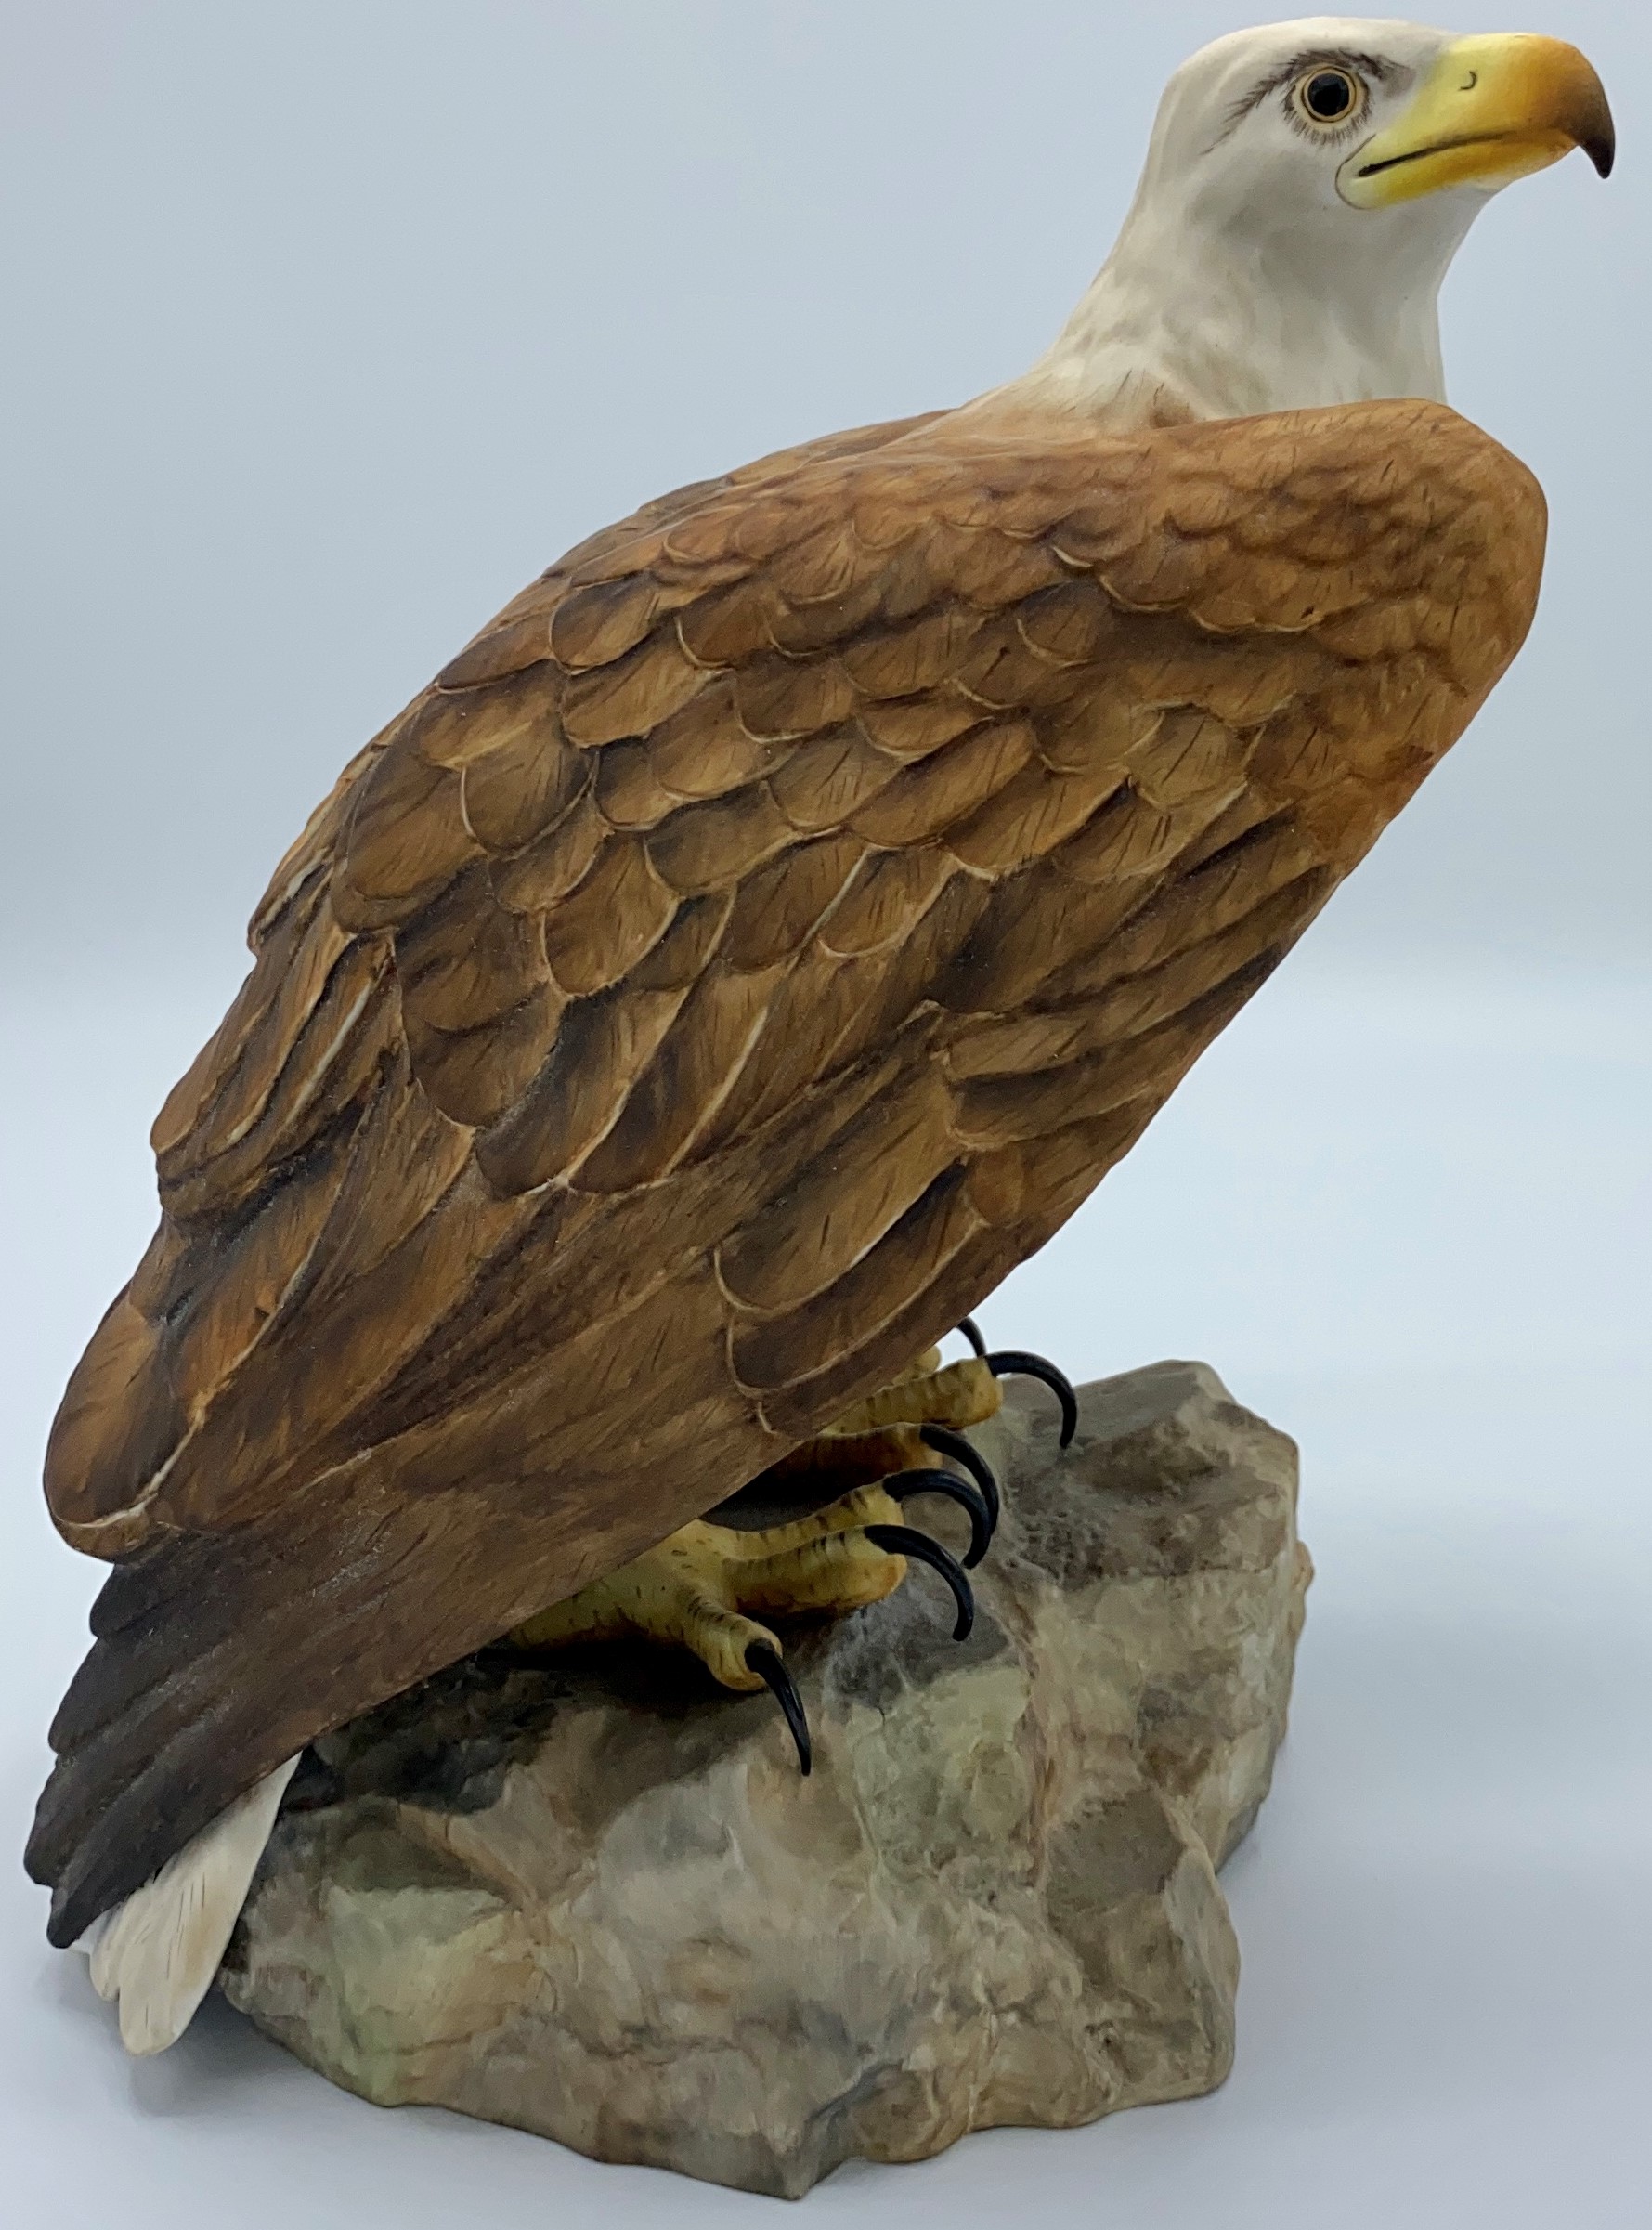 Royal Crown Derby porcelain figure of bald eagle, modelled standing on rocky outcrop, red factory